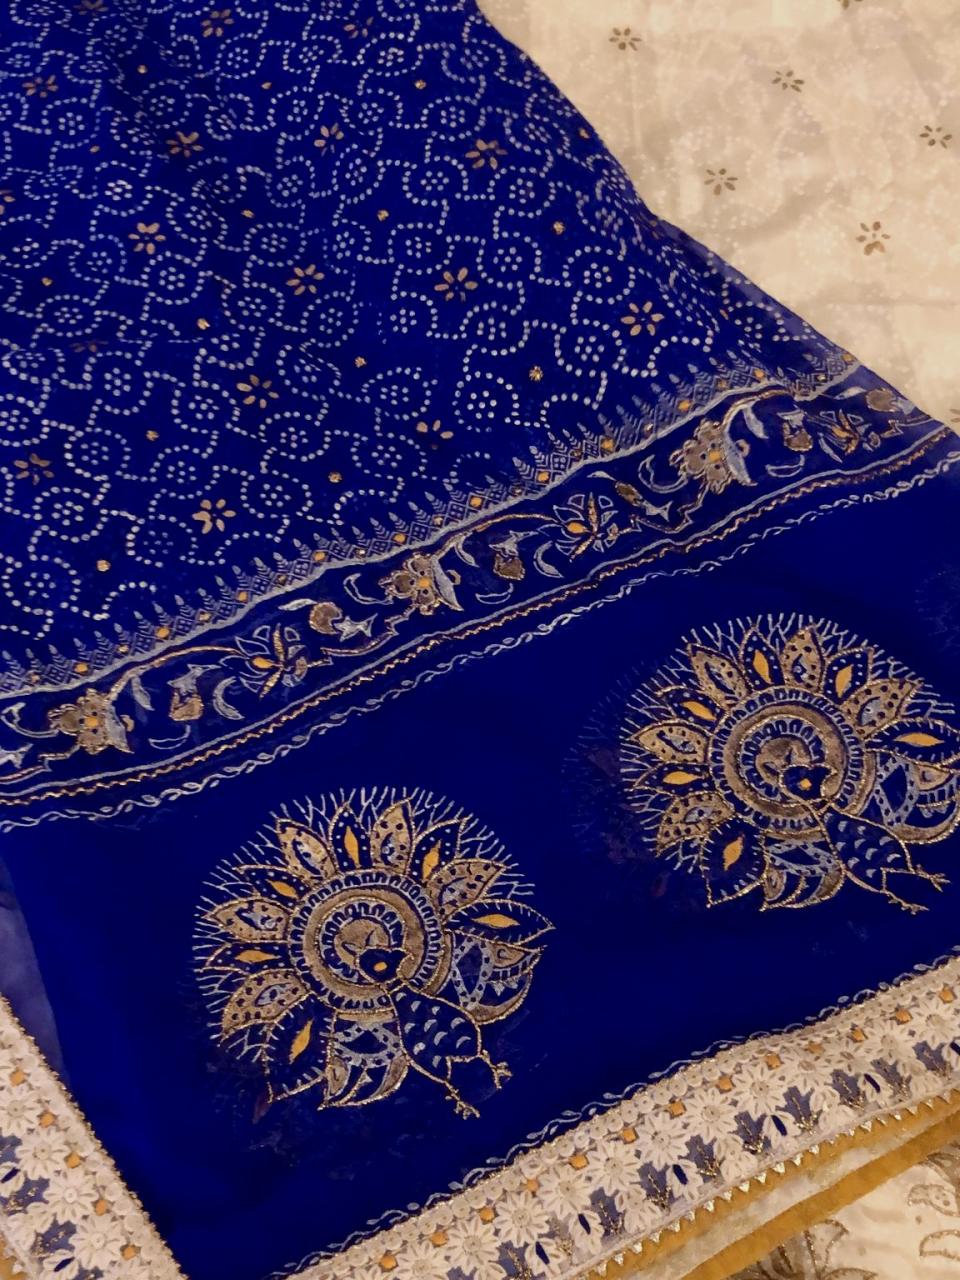 Perahan is renowned for detailed dupatta designs. This royal blue dupatta is embellished with peacock motifs. 